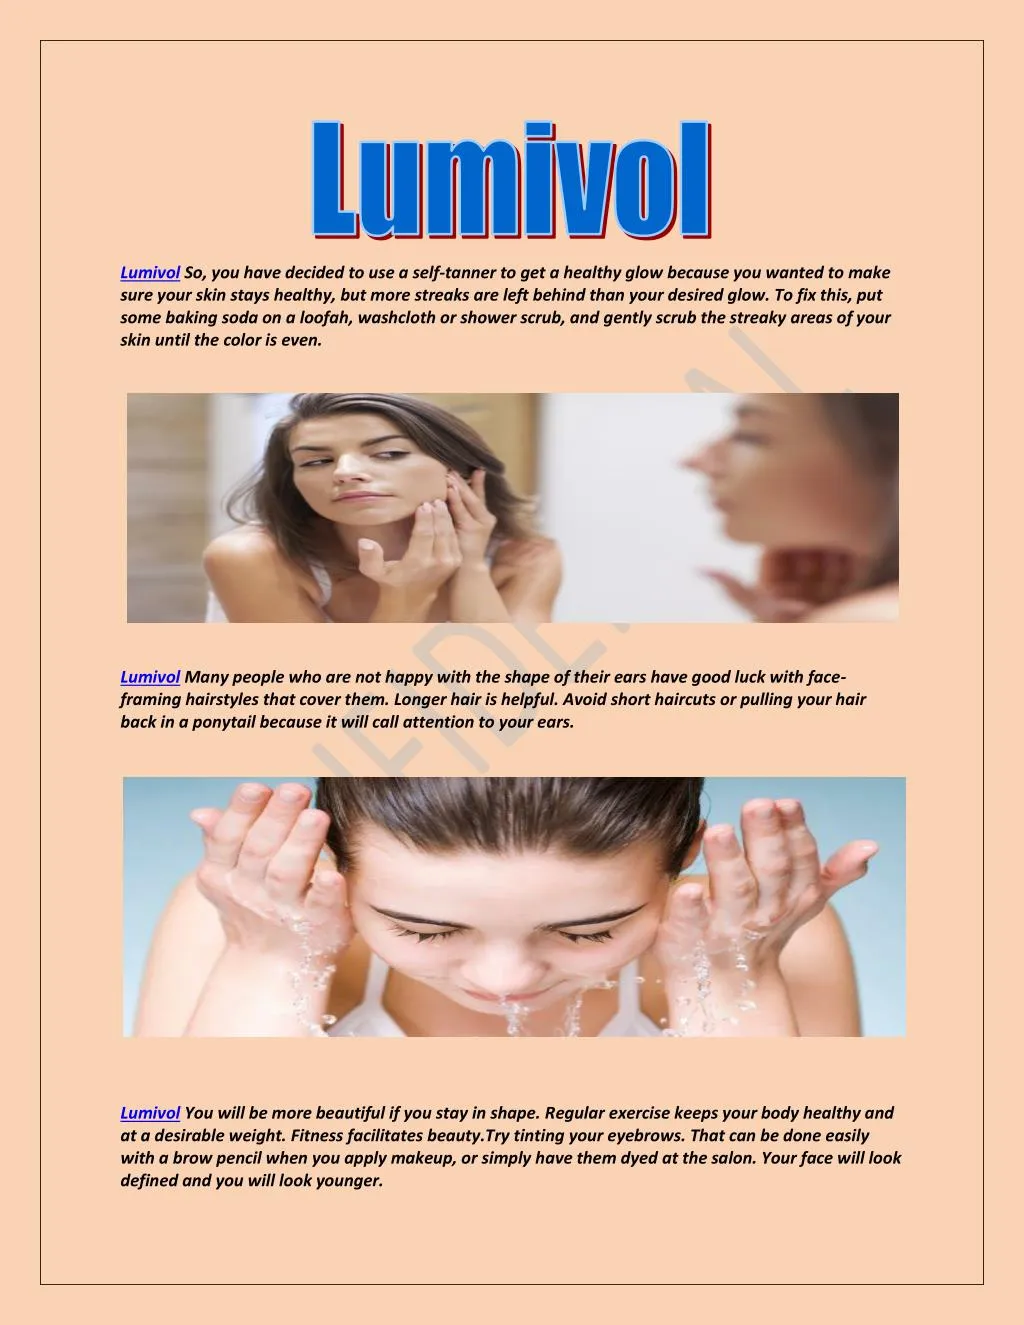 lumivol so you have decided to use a self tanner